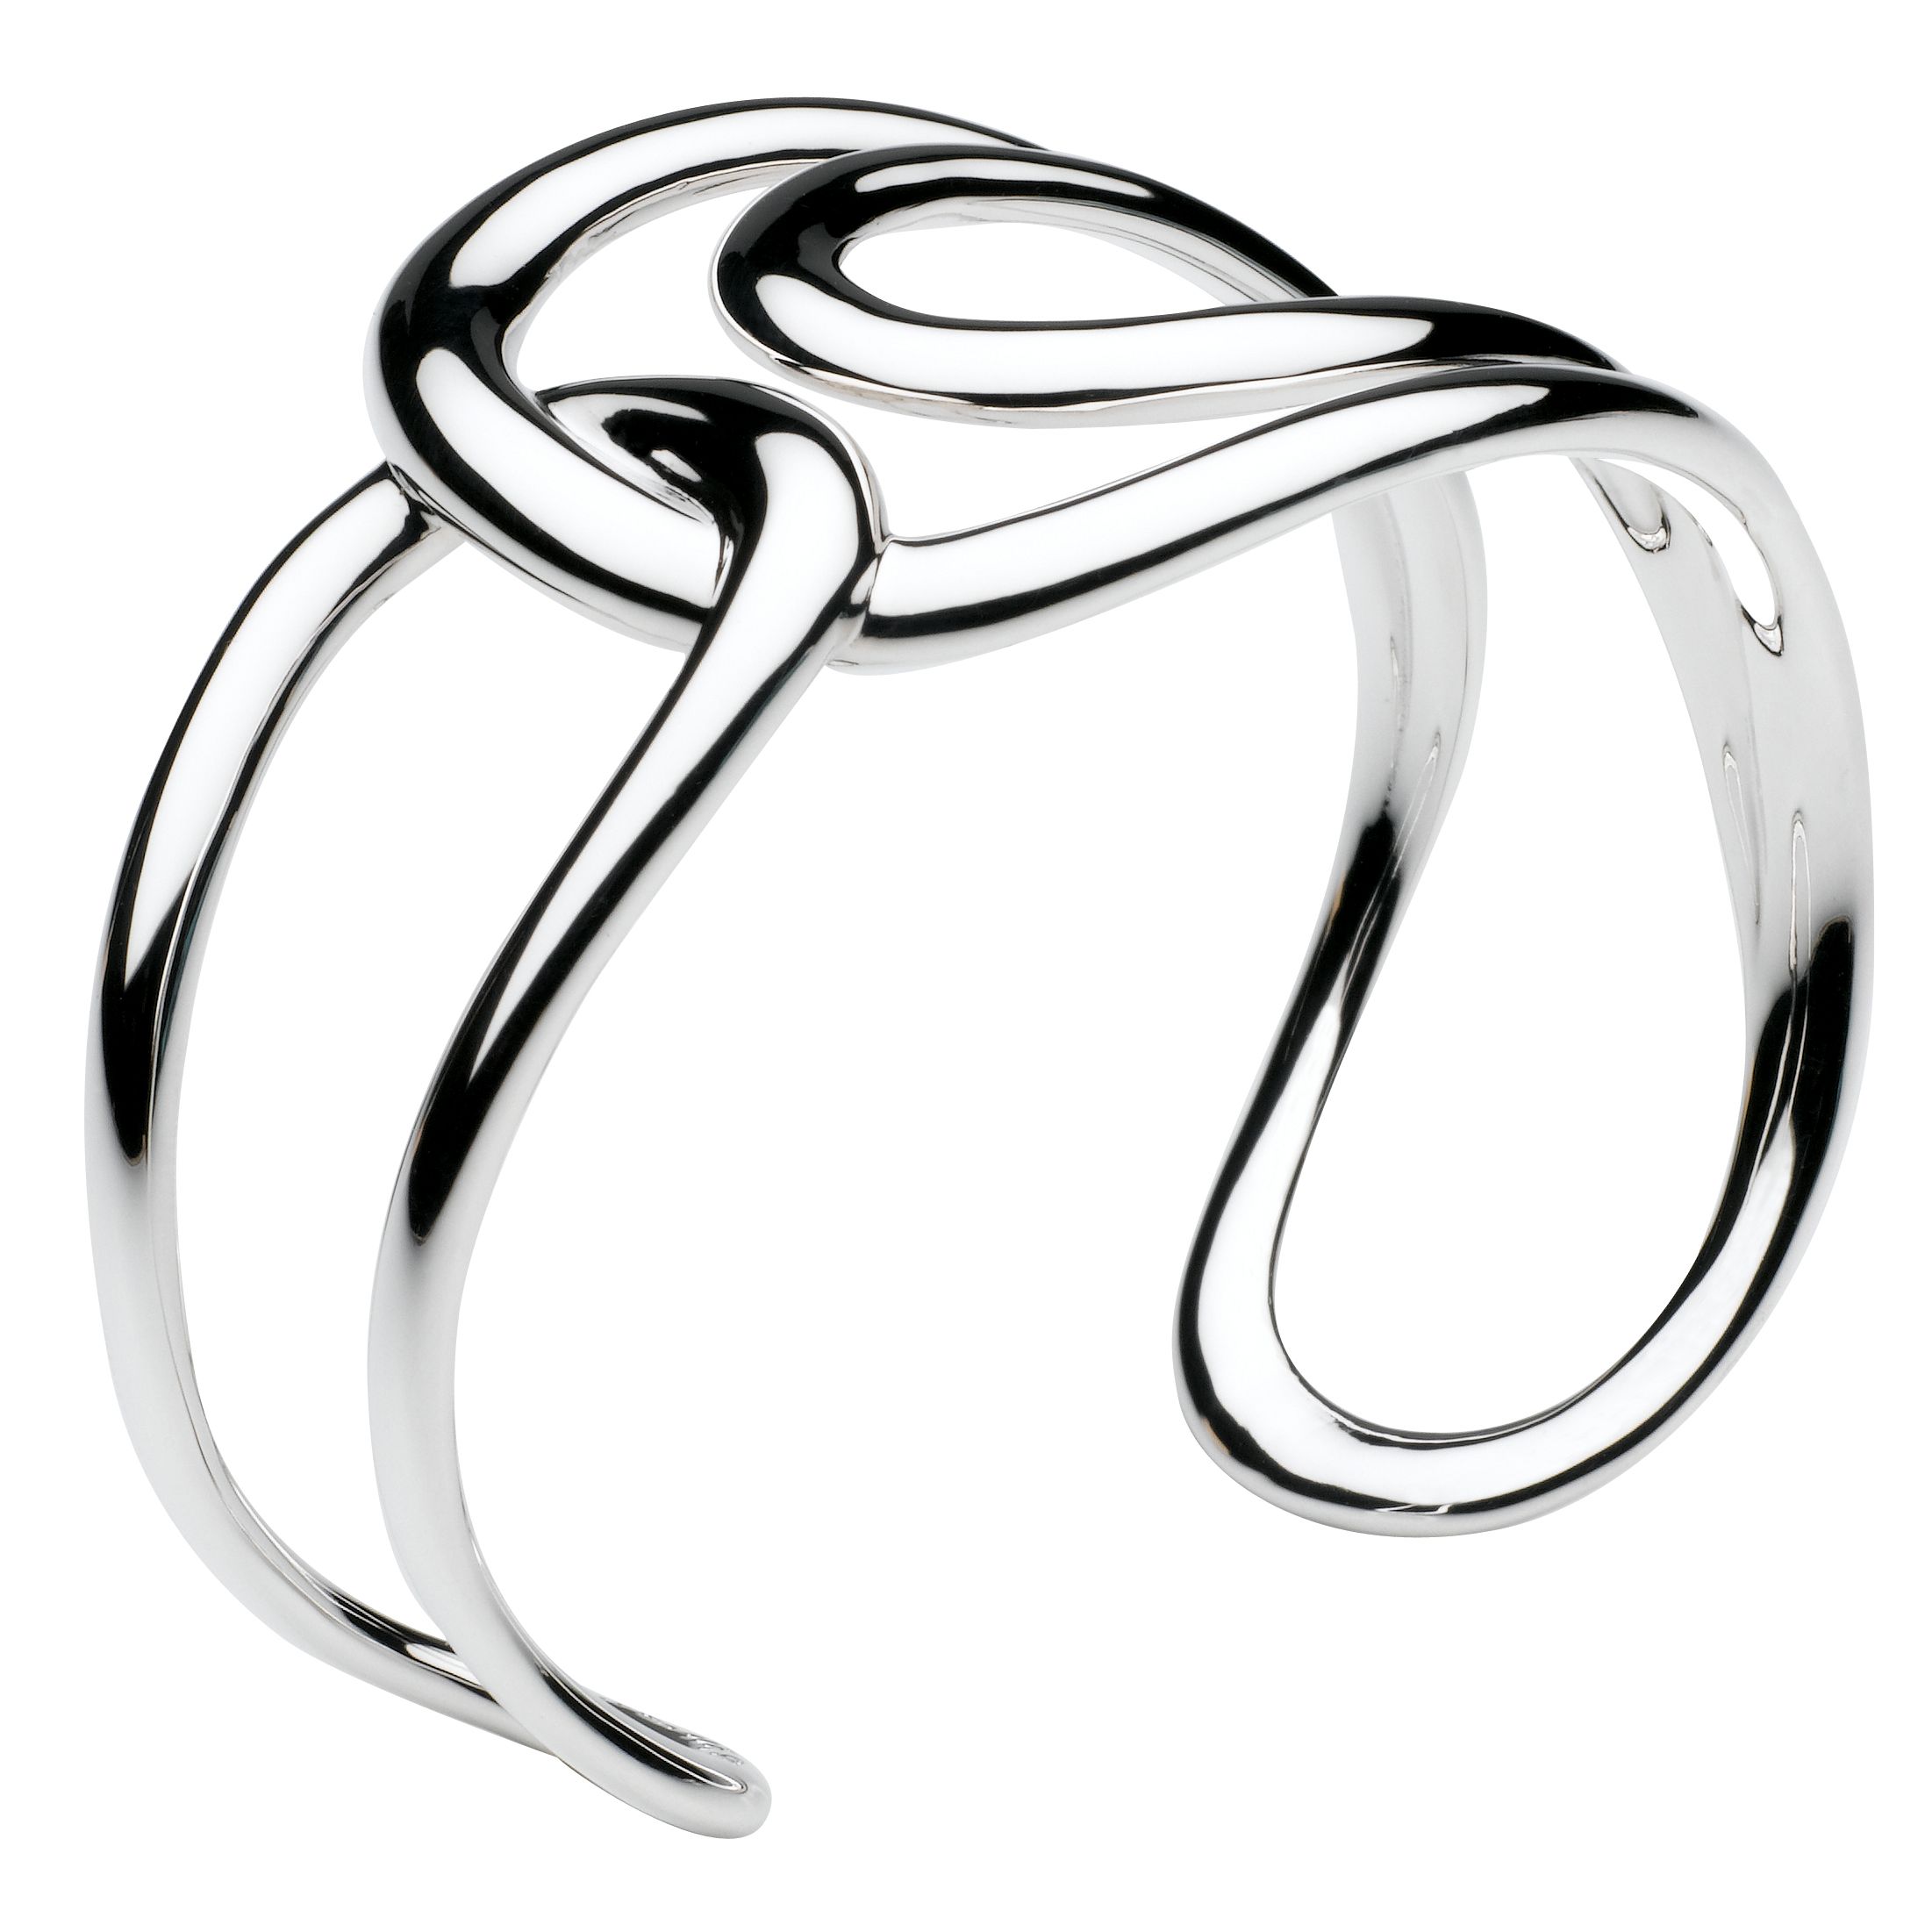 Kit Heath Sterling Silver Looped Link Cuff at John Lewis